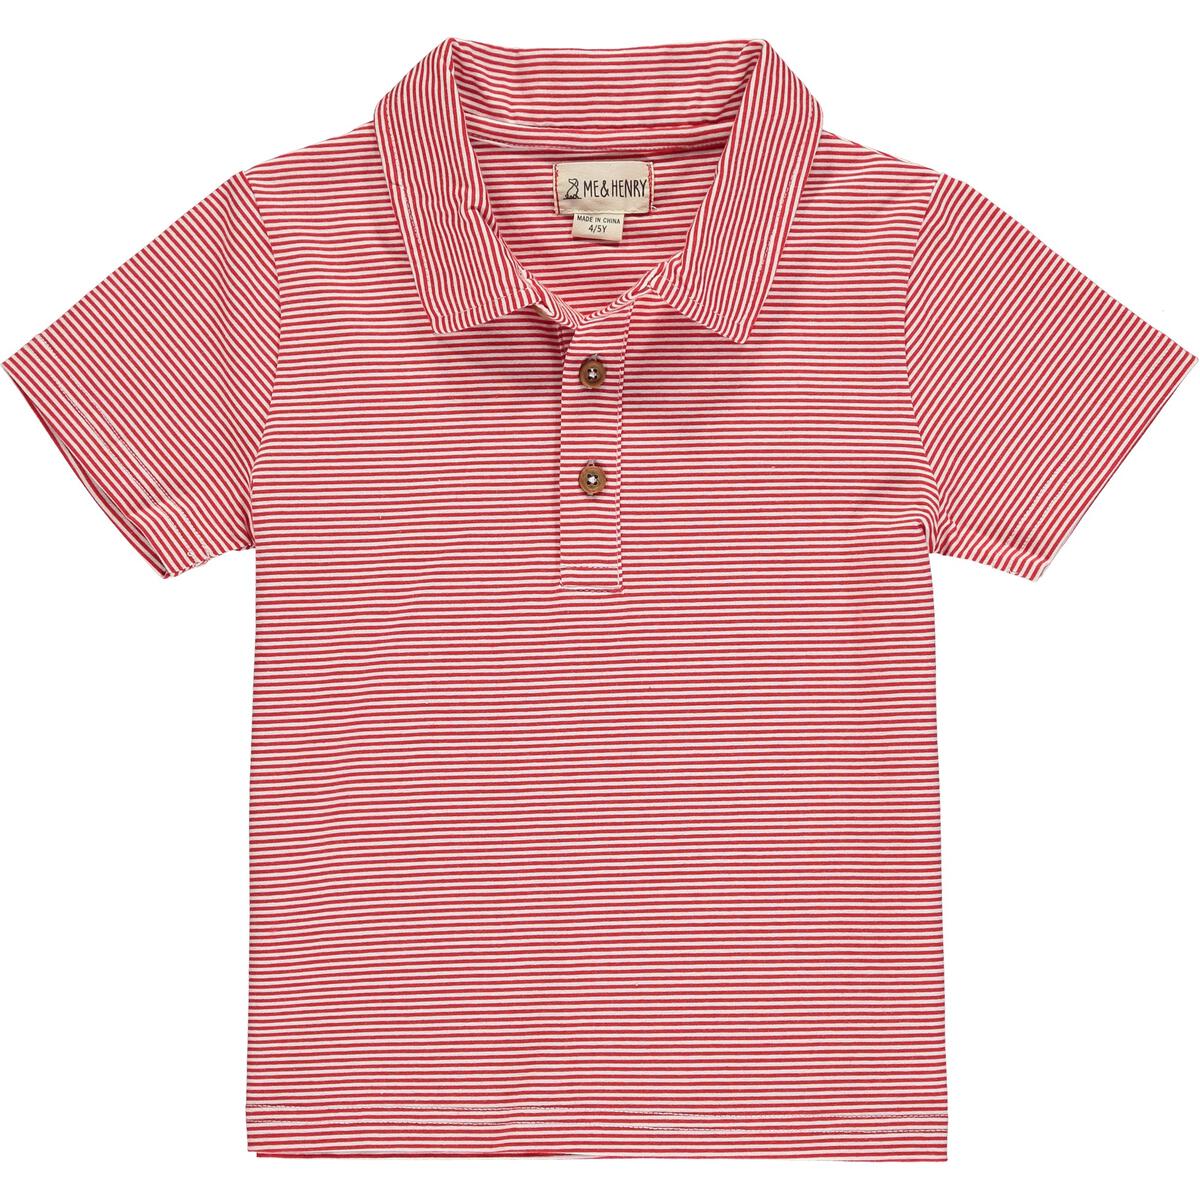 Halyard polo // red stripe // Henry & Me